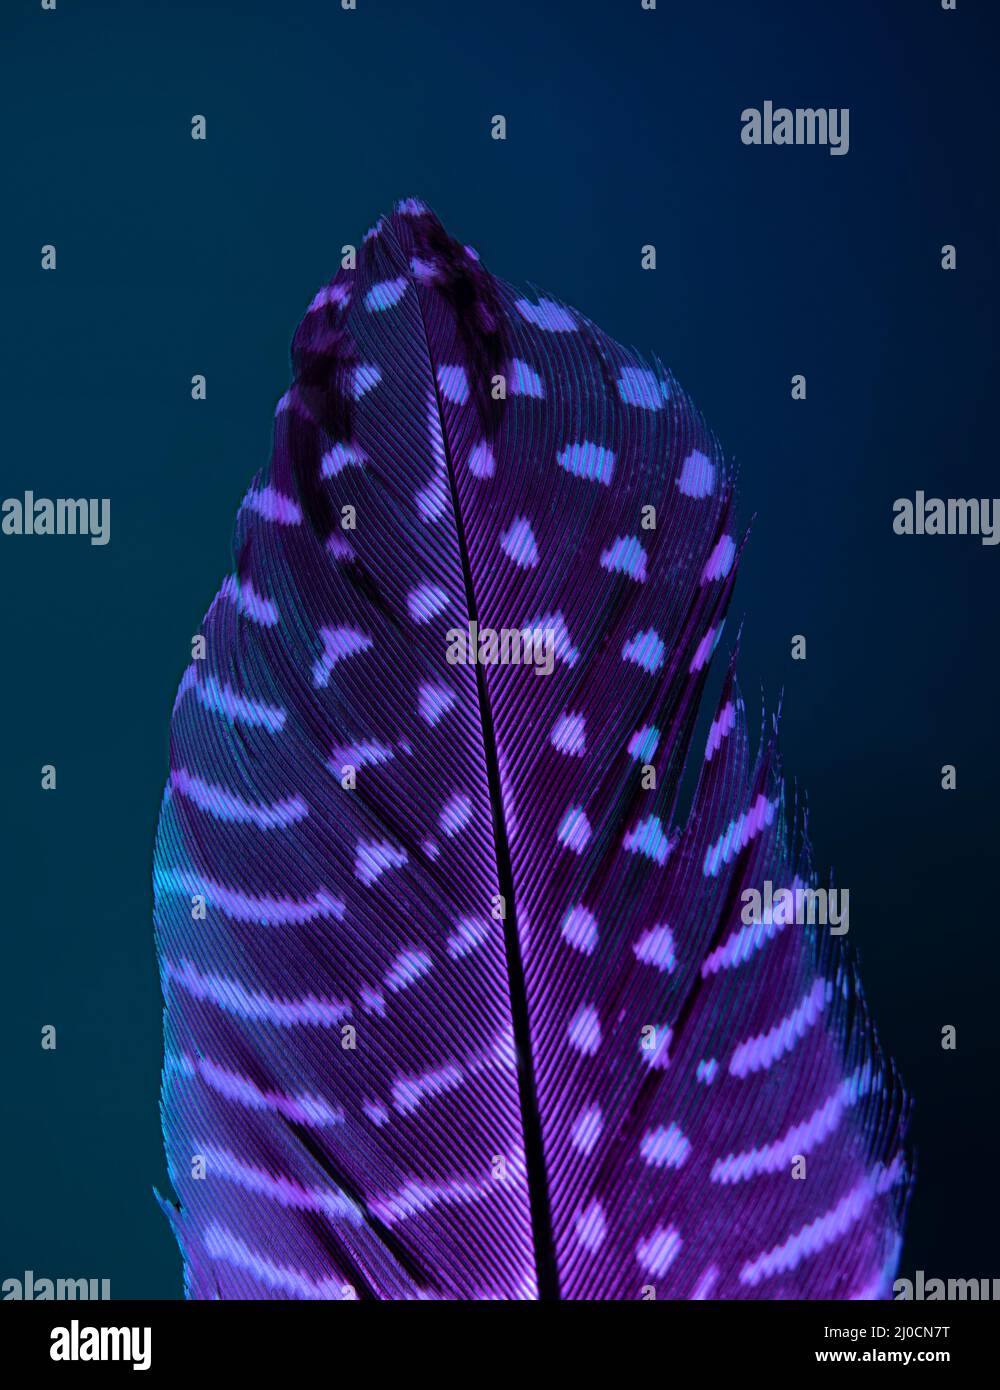 Bird feather closeup. Abstract colorful macro of black feather with white dots. Dual tone lighting purple and blue on dark background. Wing or tail fe Stock Photo